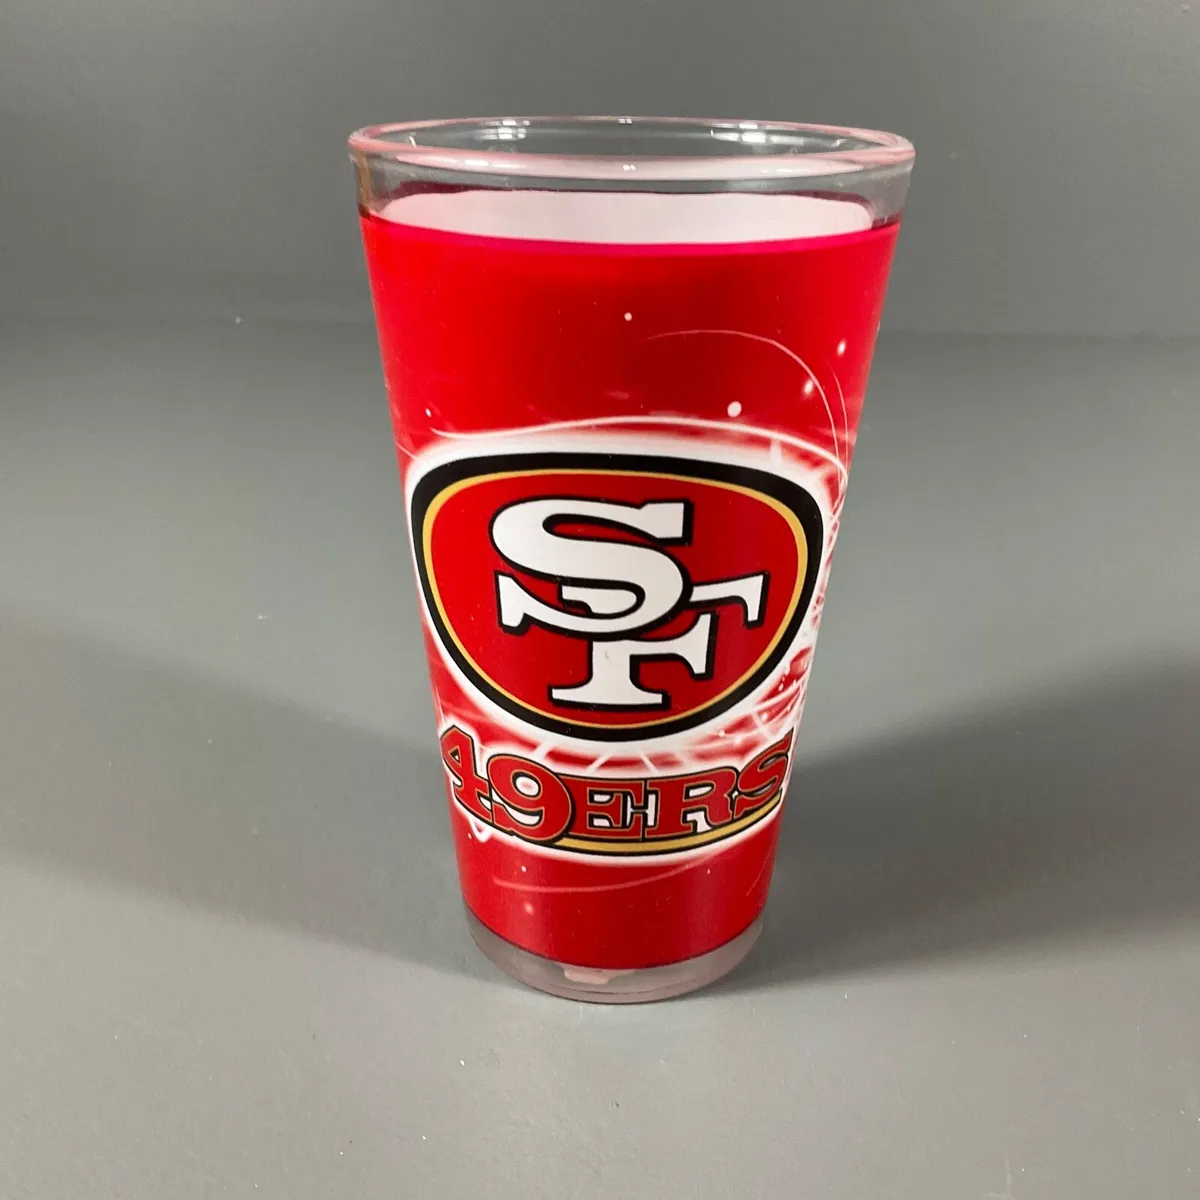 San Francisco 49ers 16 oz Glass Red Cup Mug NFL Football Licensed Product